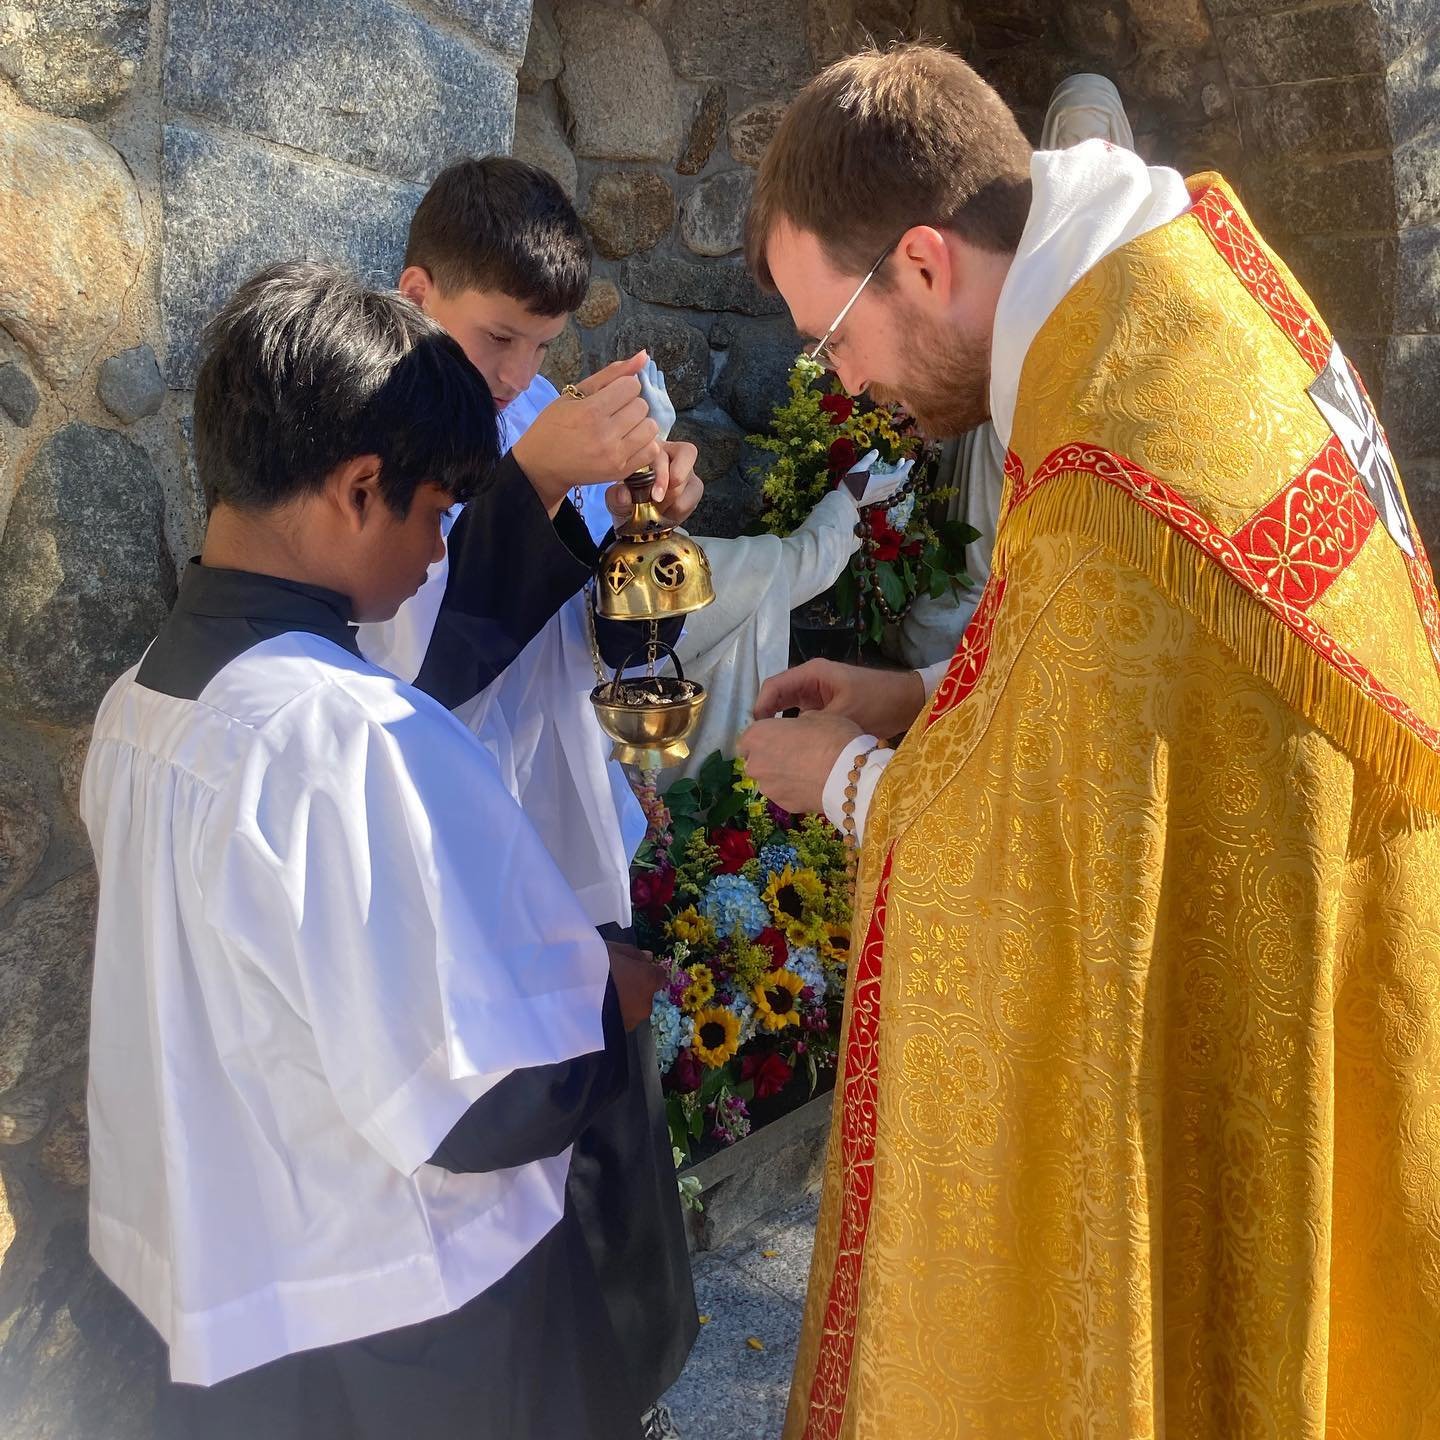 Father Dunlevy, presides of the procession, with assistance from altar servers, pictured here, Kolbe Coolman, grade 6, and Anthony Thibeault, grade 7.